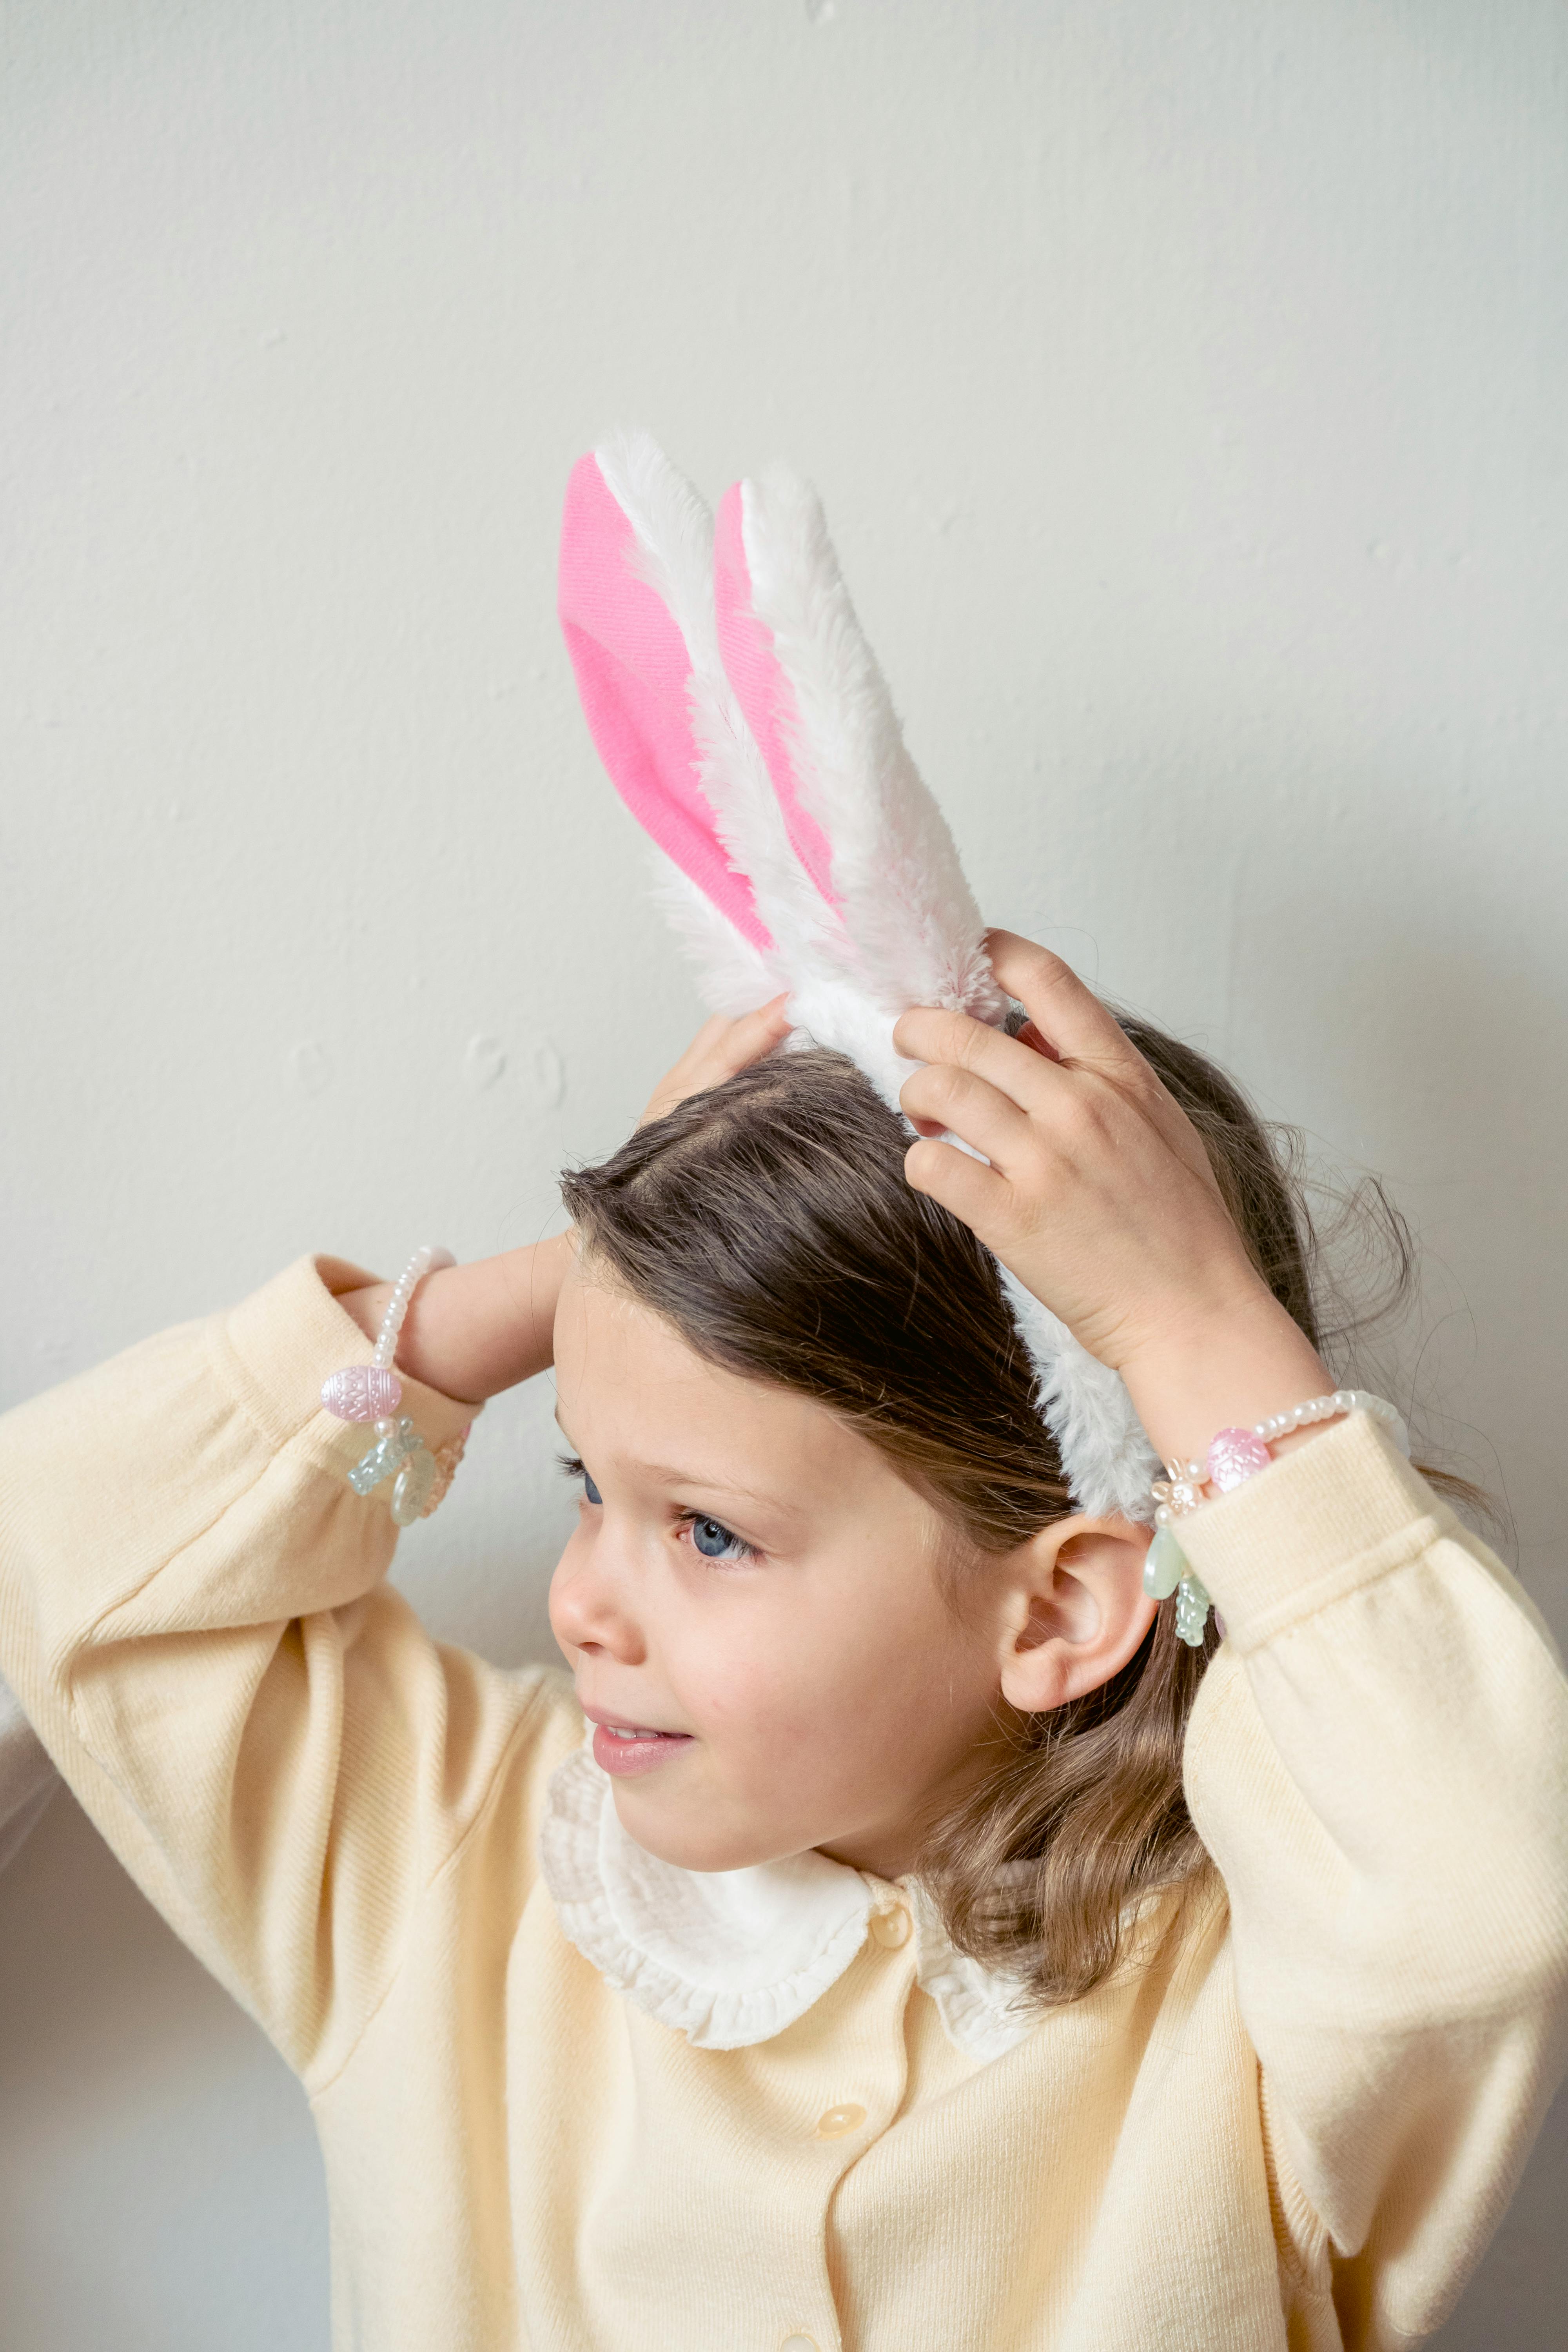 Download Free Bunny Ears Pictures [HD]